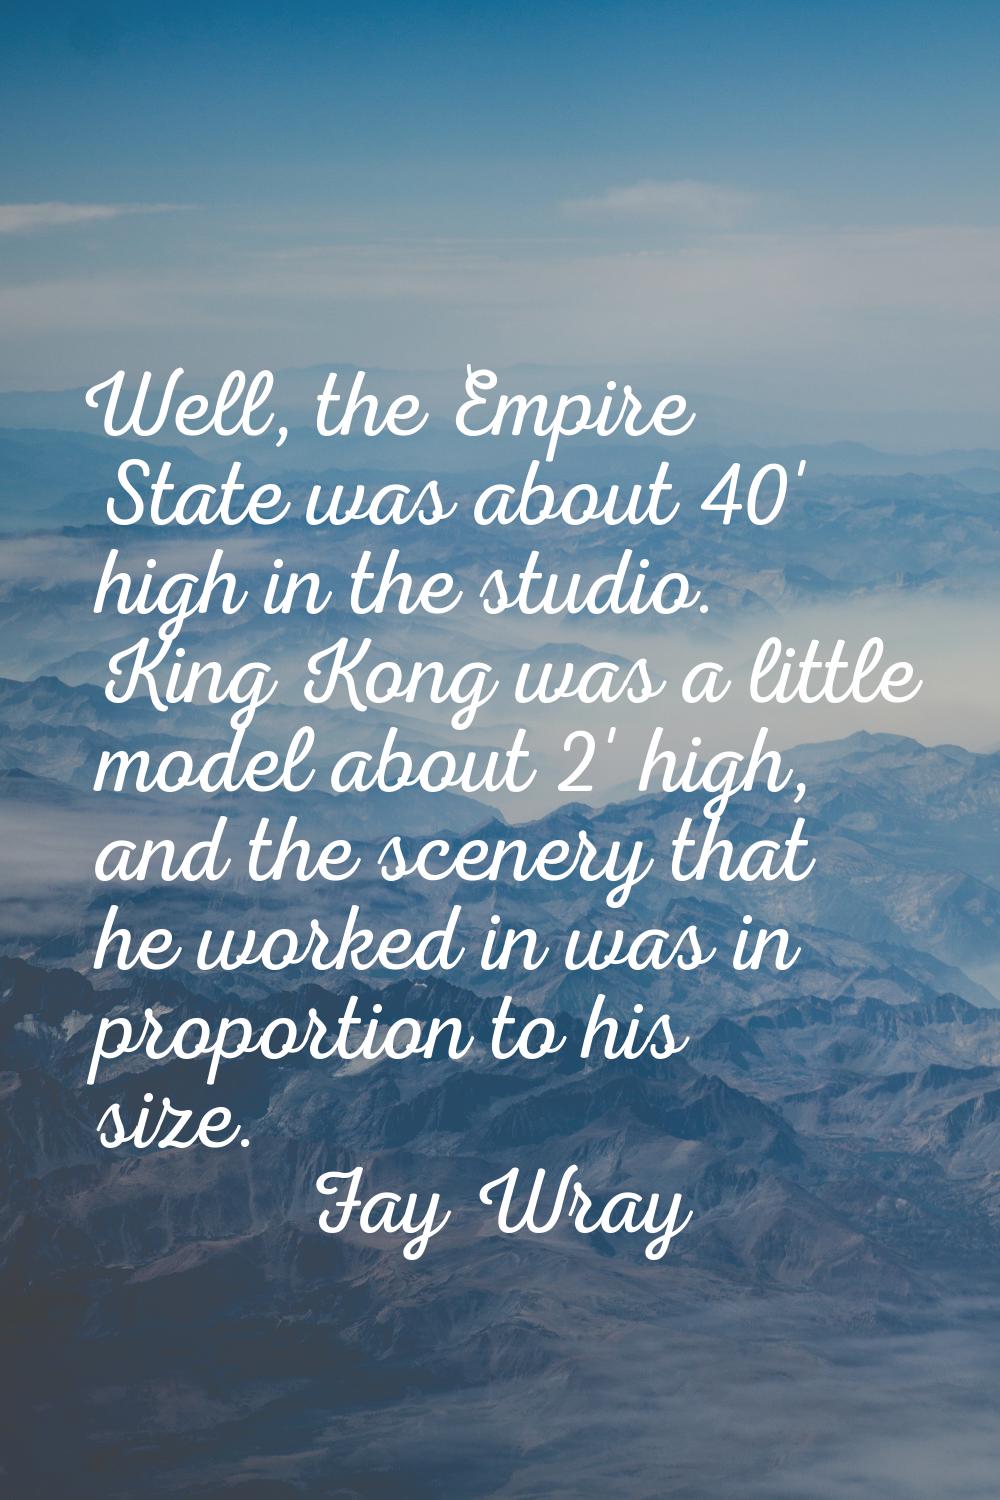 Well, the Empire State was about 40' high in the studio. King Kong was a little model about 2' high